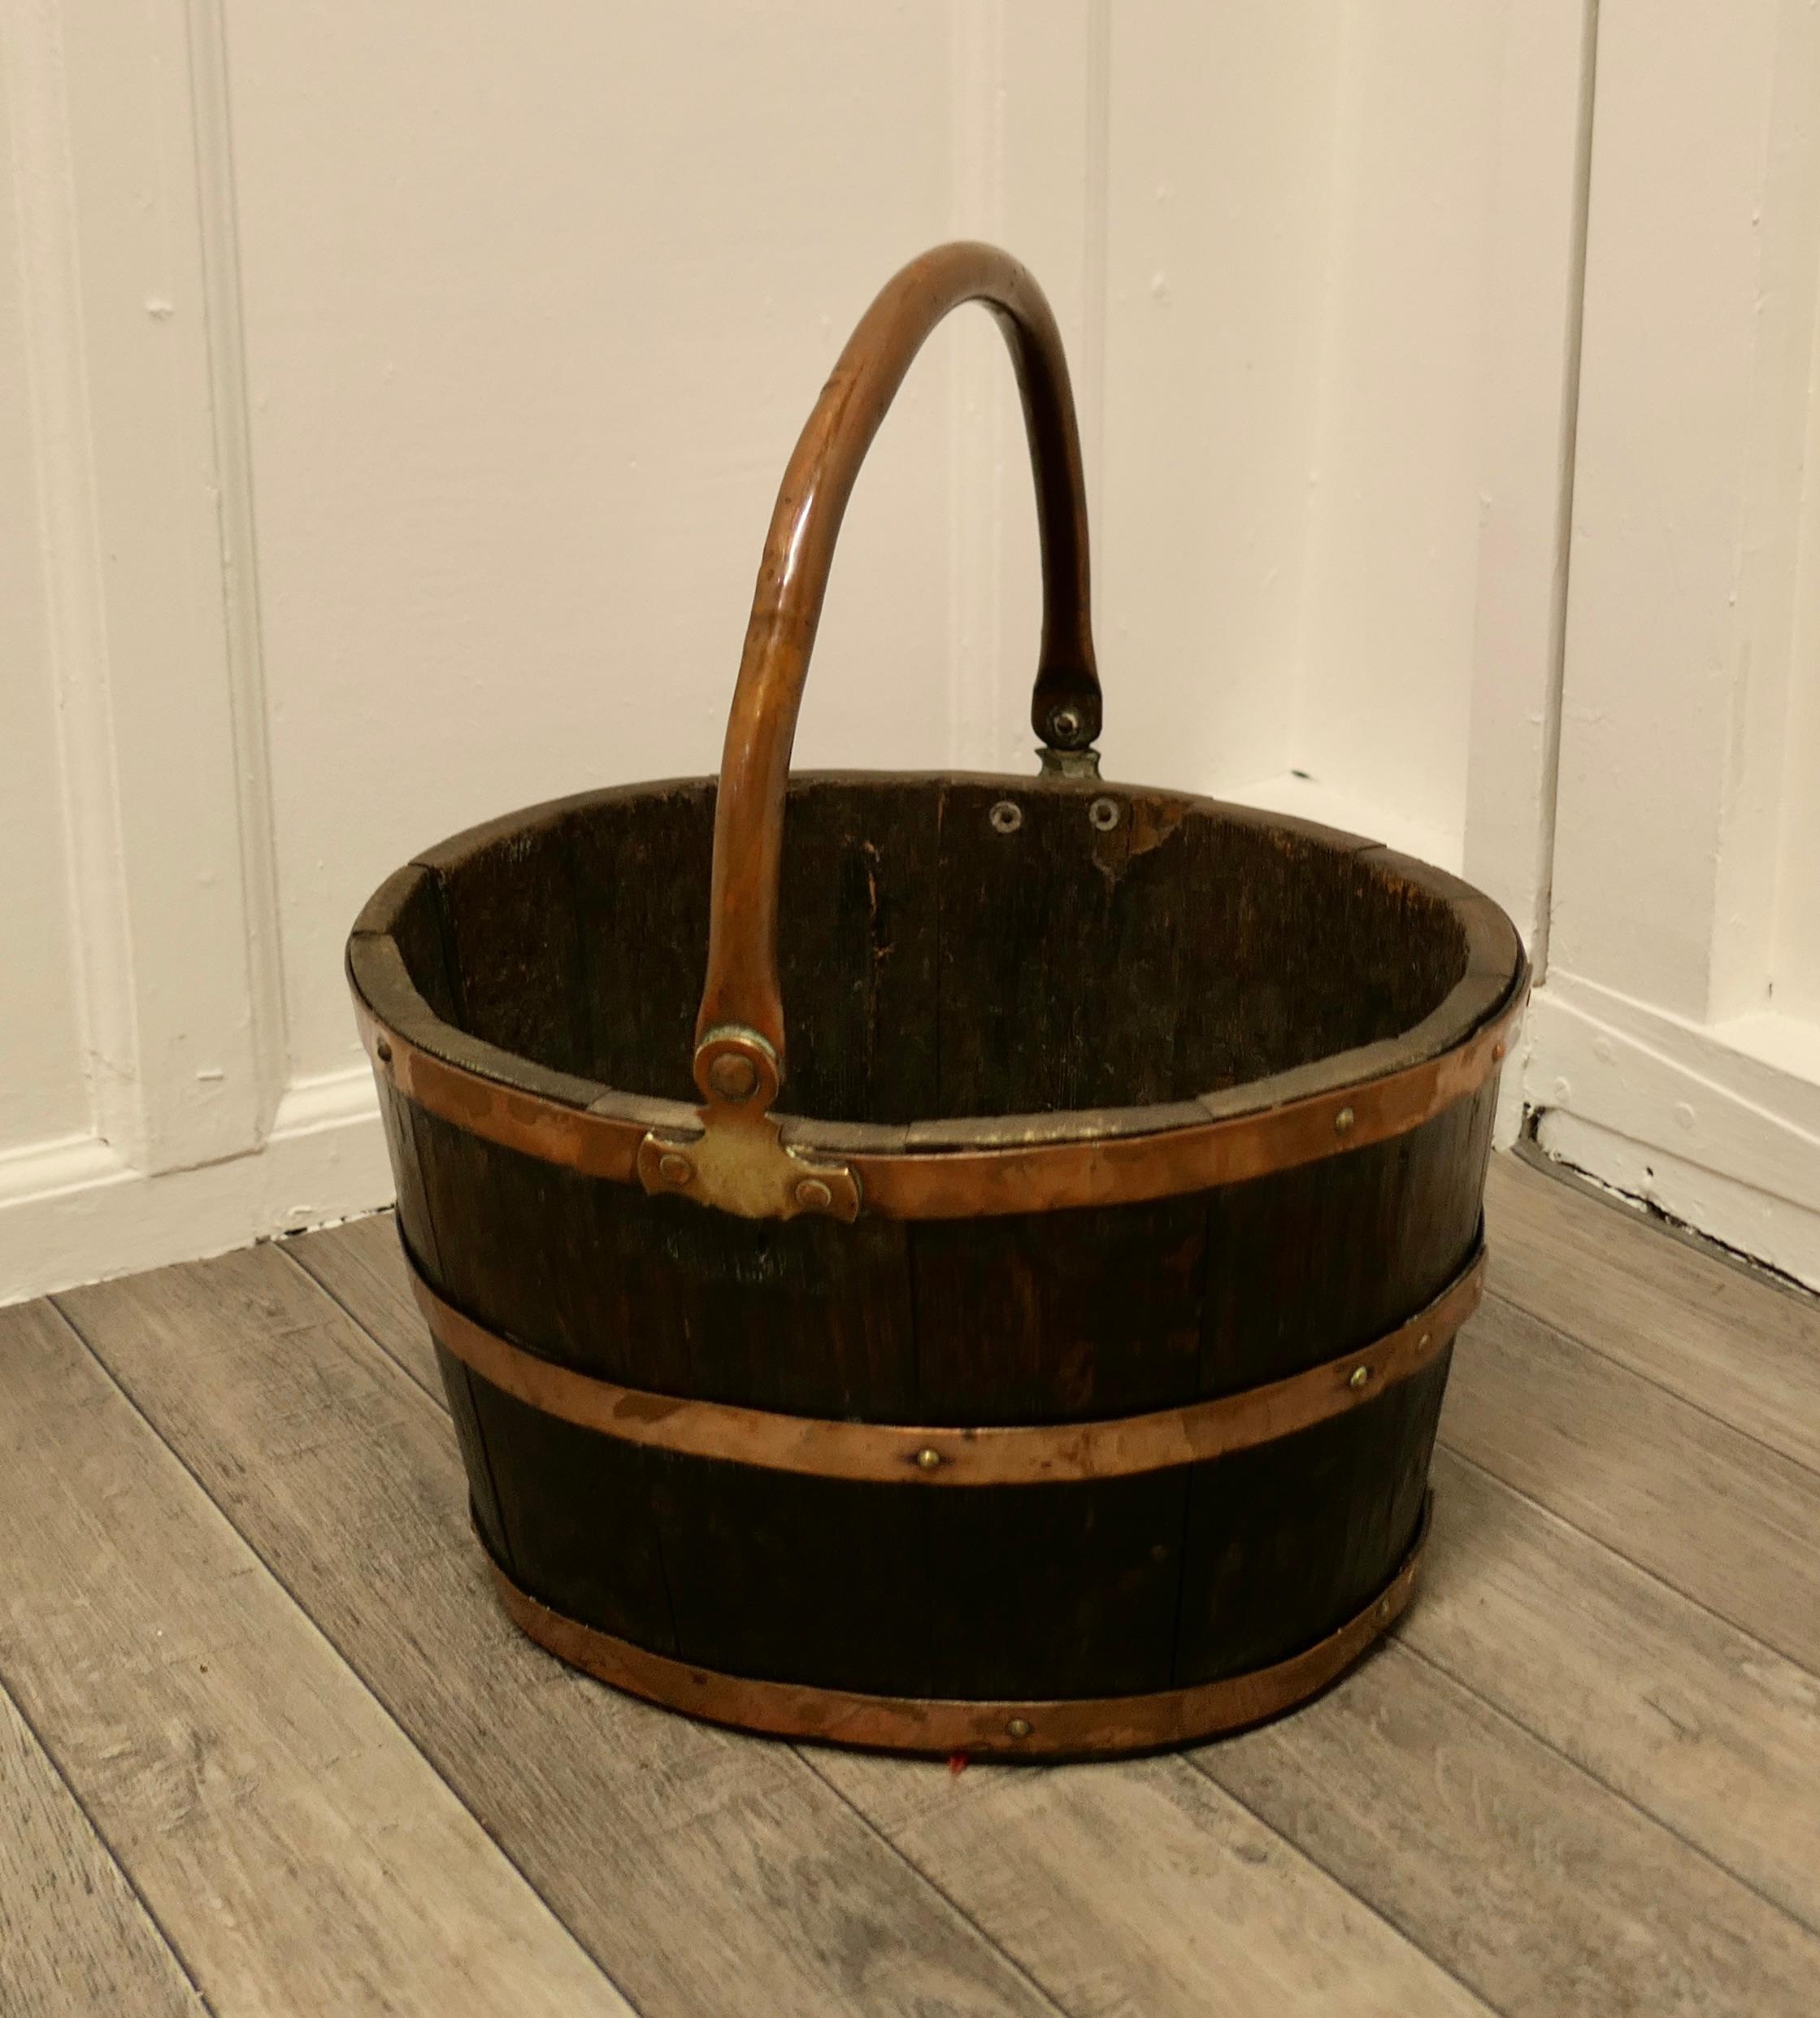 Copper and oak bucket for coal or logs

A superb coopered Oak barrel for Coal, the barrel is slightly oval in shape and has copper banding with a swing handle which allows it to be carried like a traditional coal bucket 
This is a very good